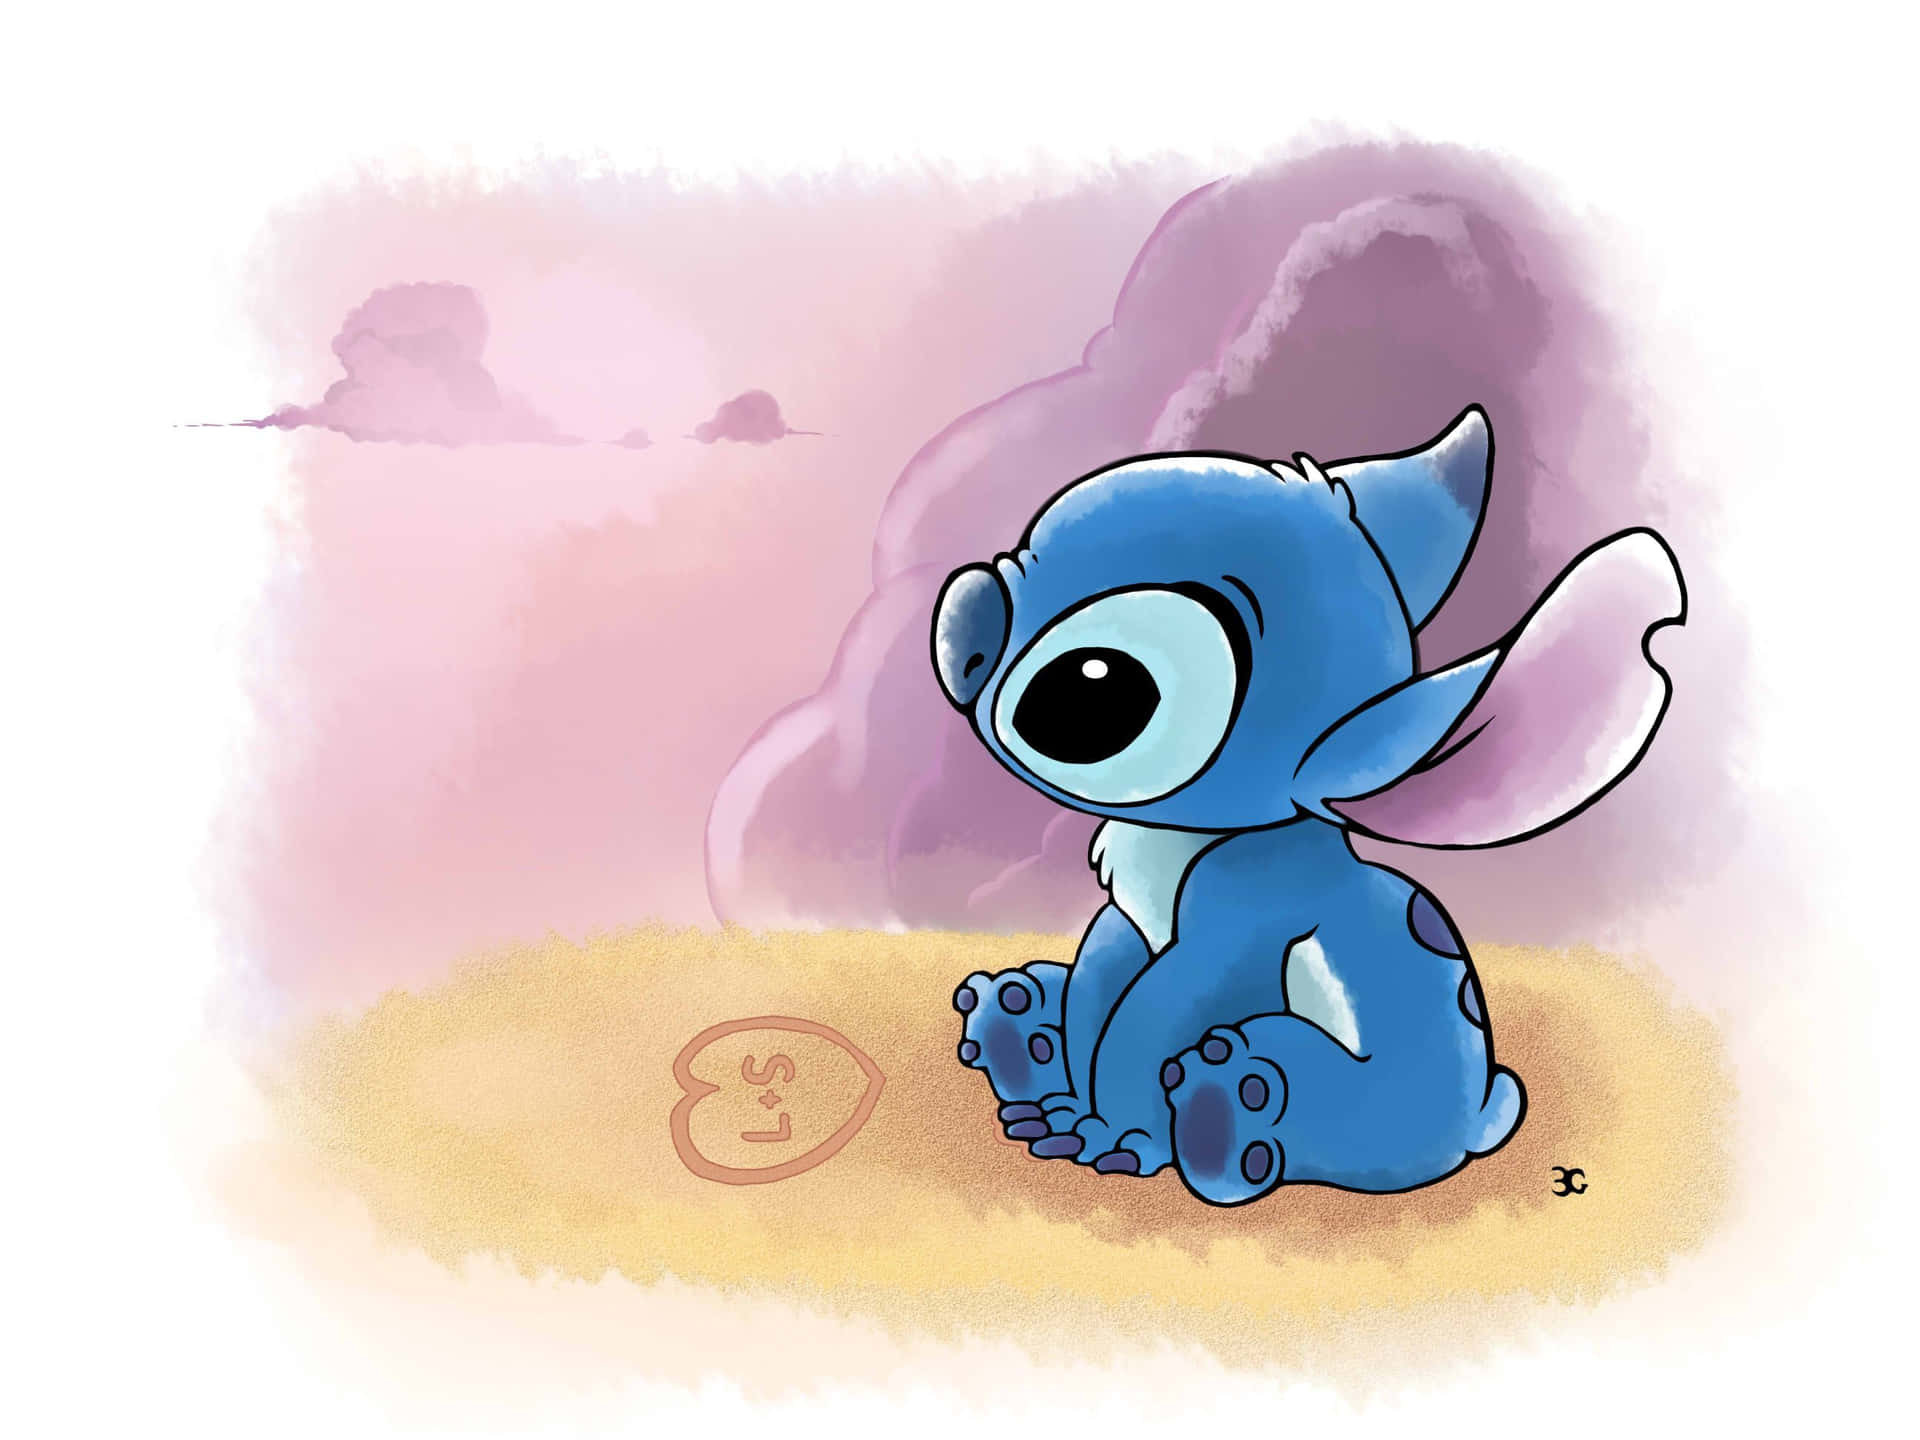 "Sadness isn't always easy to show, but Stitch wears his heart on his sleeve" Wallpaper